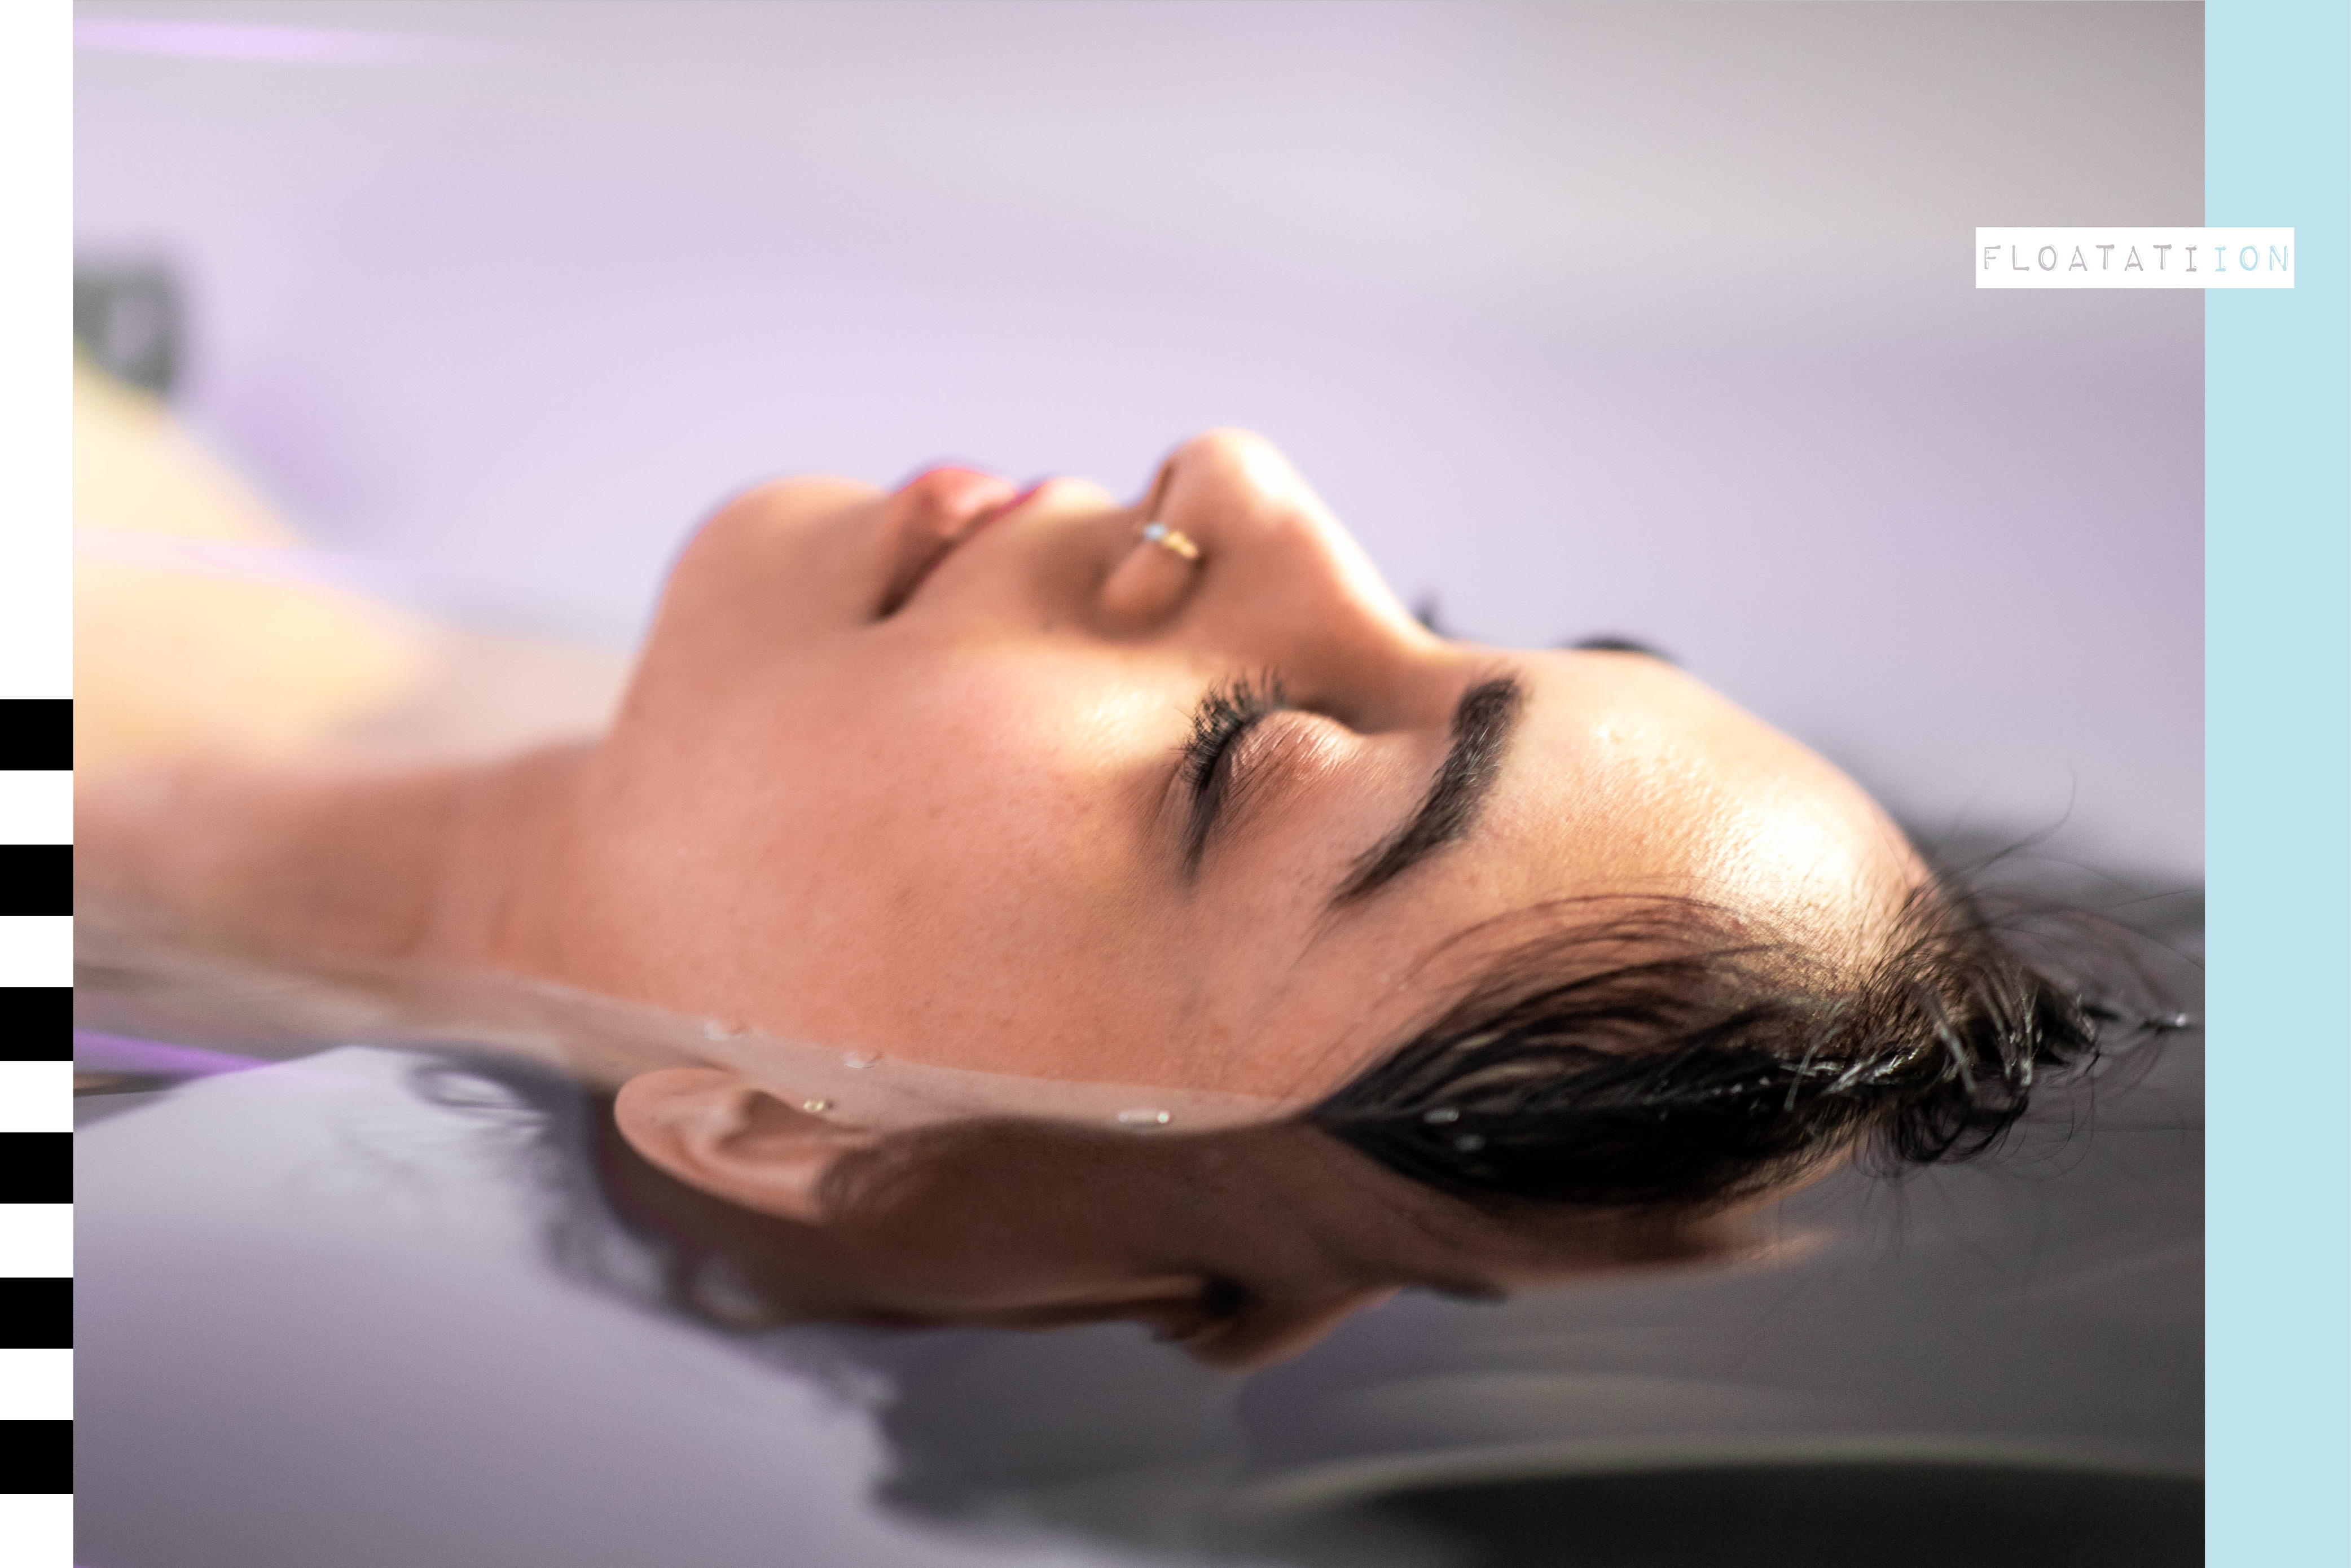 Floatation: the newest tool for improving mental and physical health?